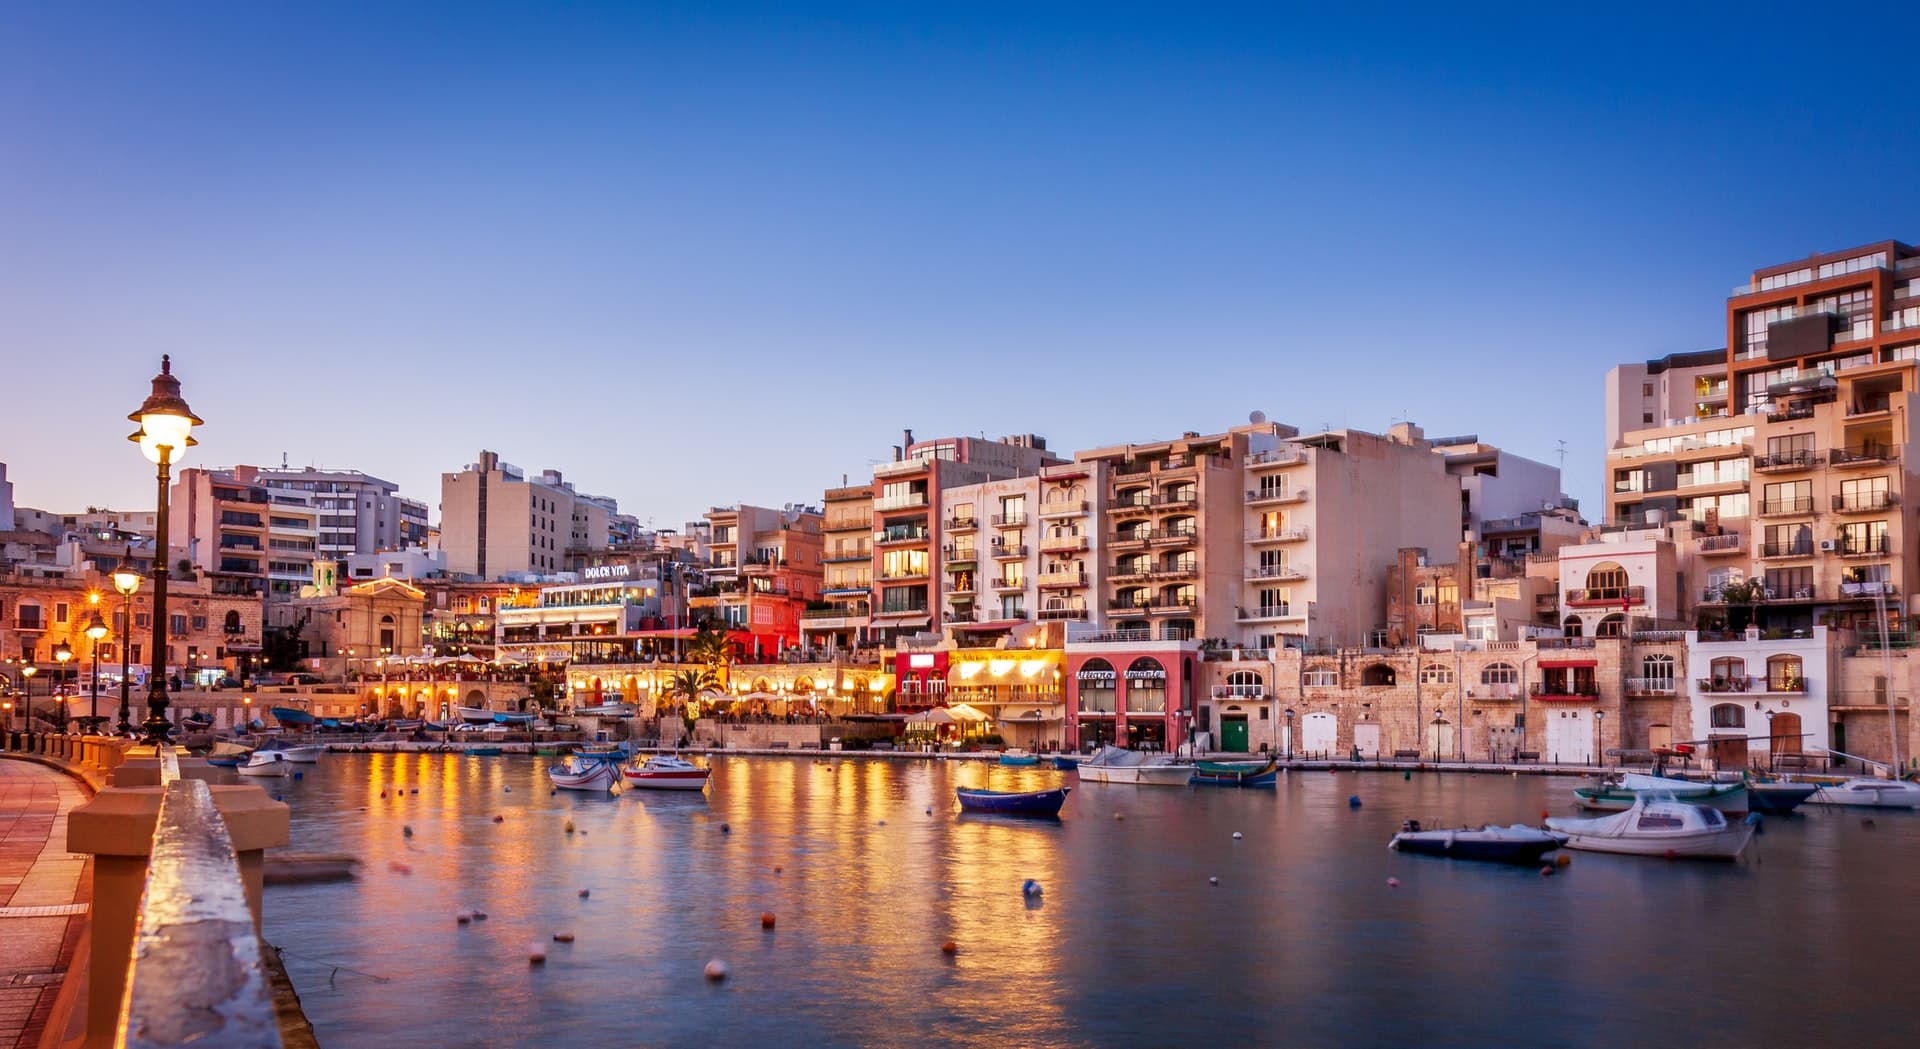 Who Can Buy Property in Malta?